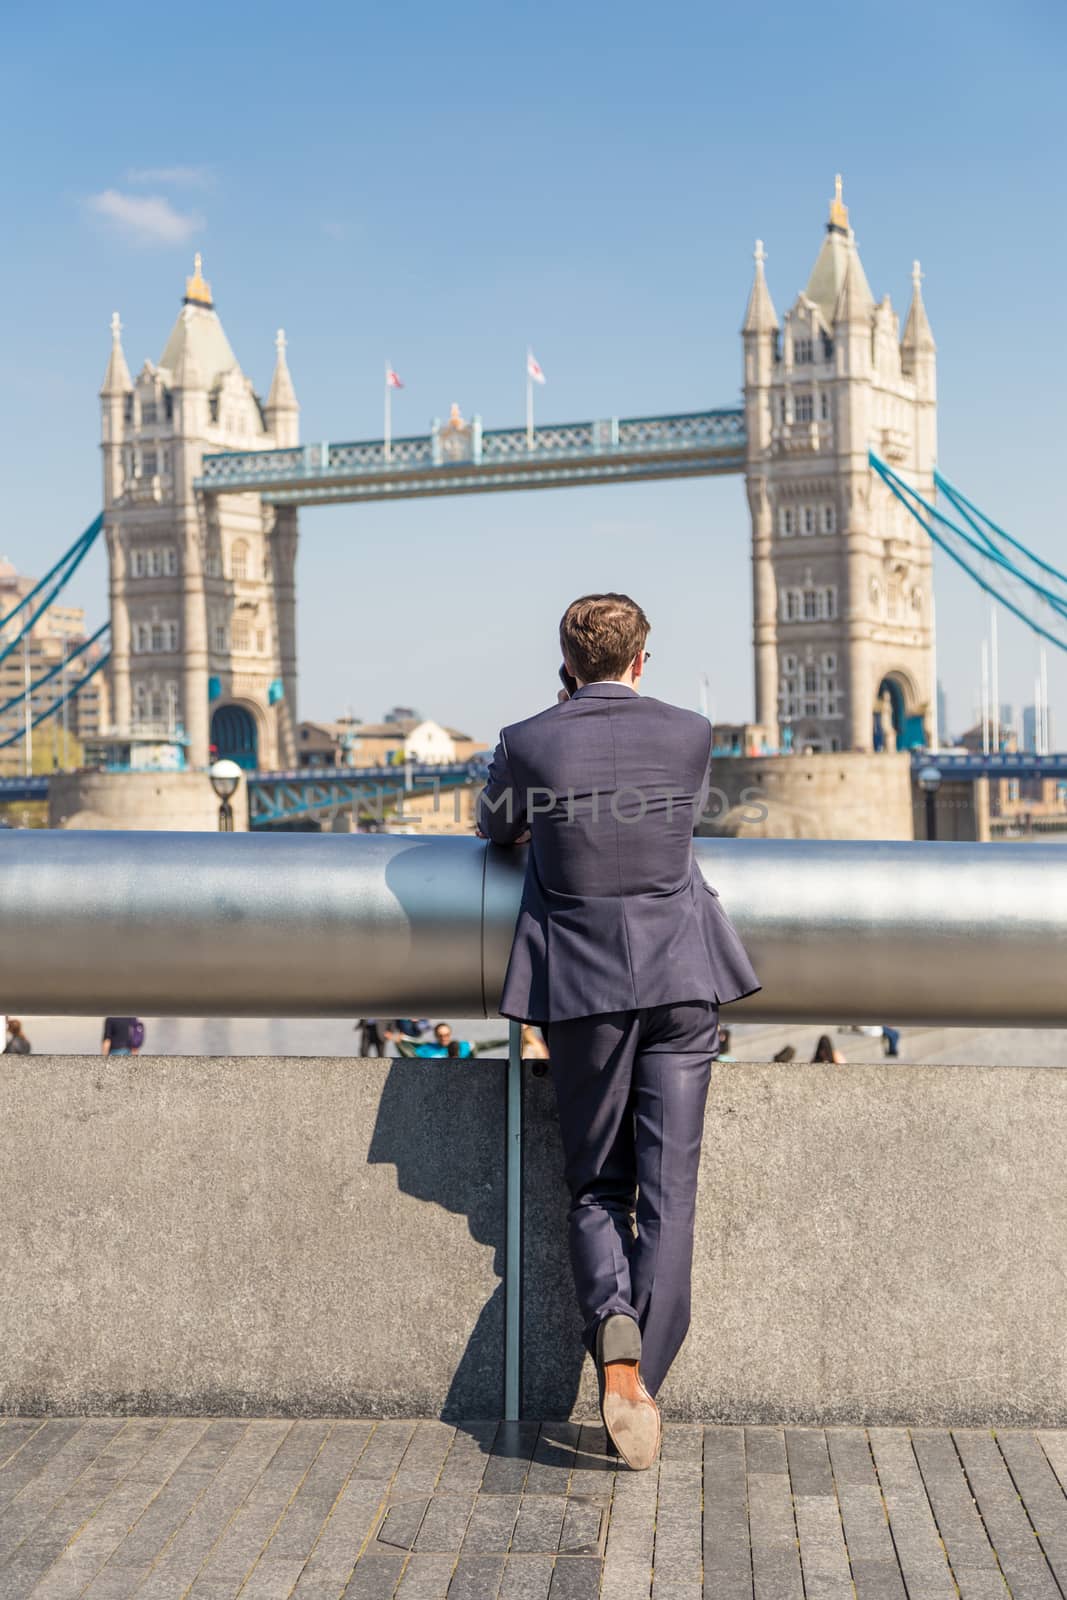 Businessman talking on mobile phone outdoor, looking at Tower Bridge in London city, UK.